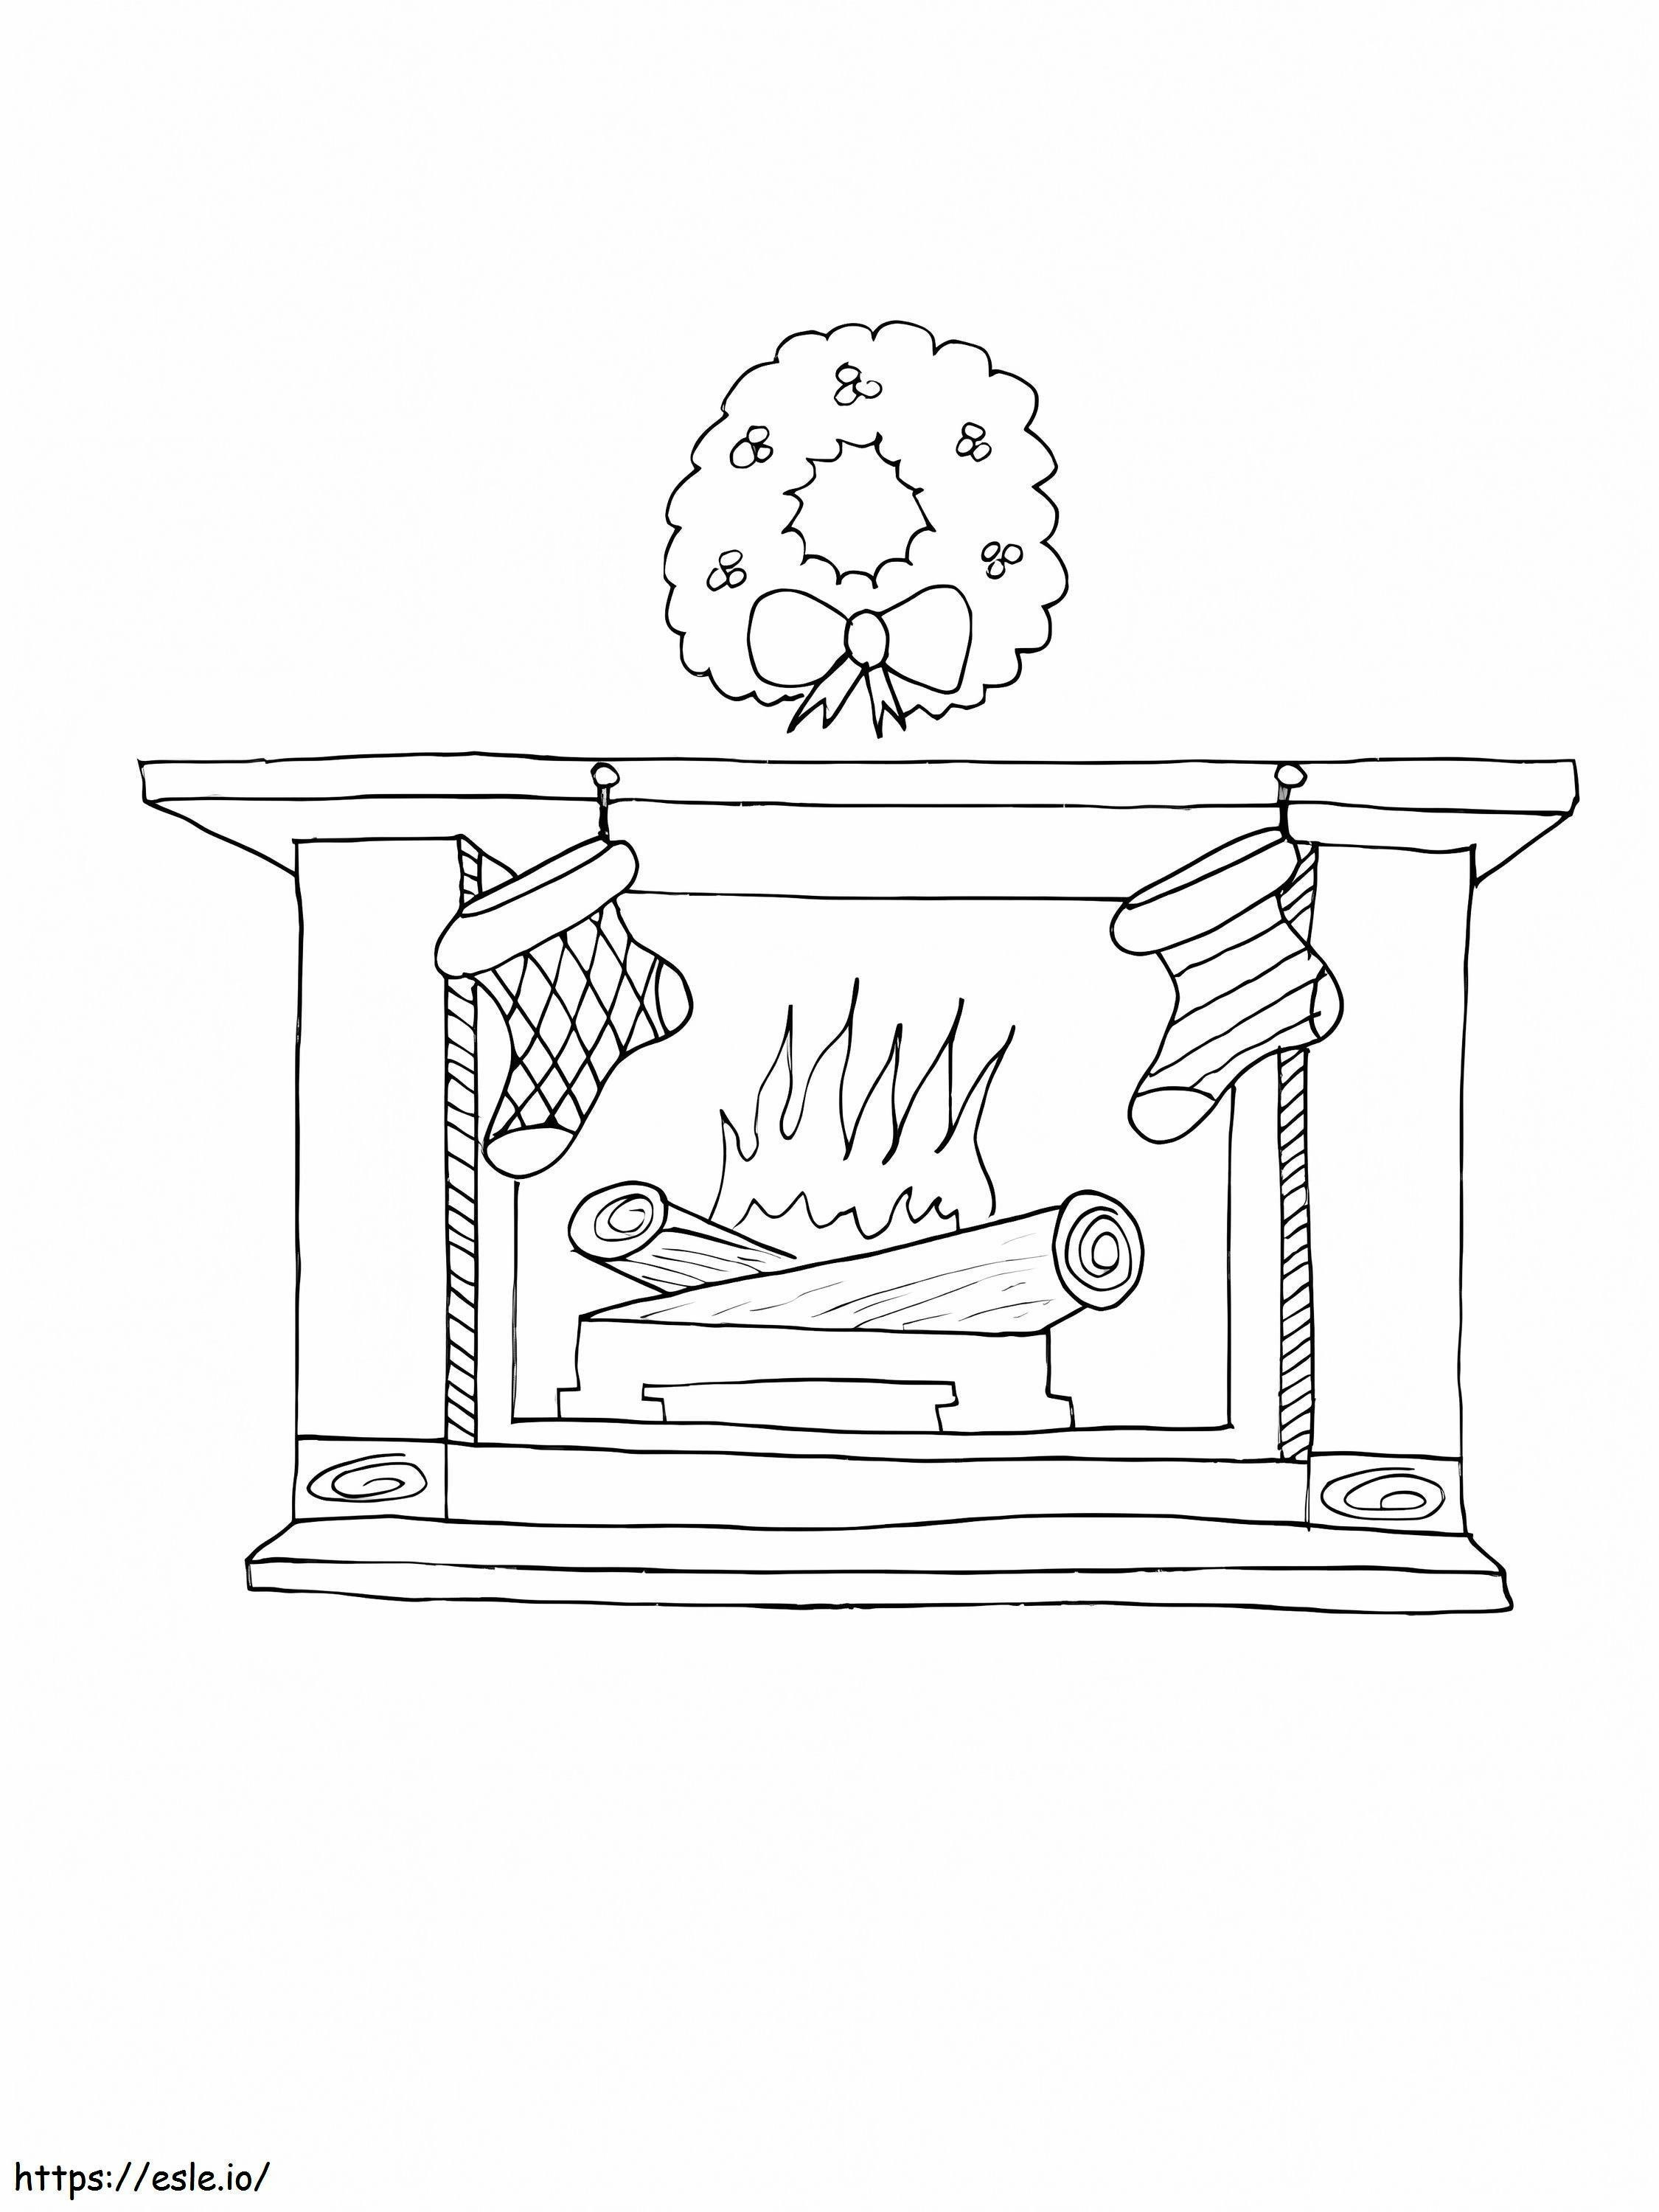 Fireplace And Wreath coloring page